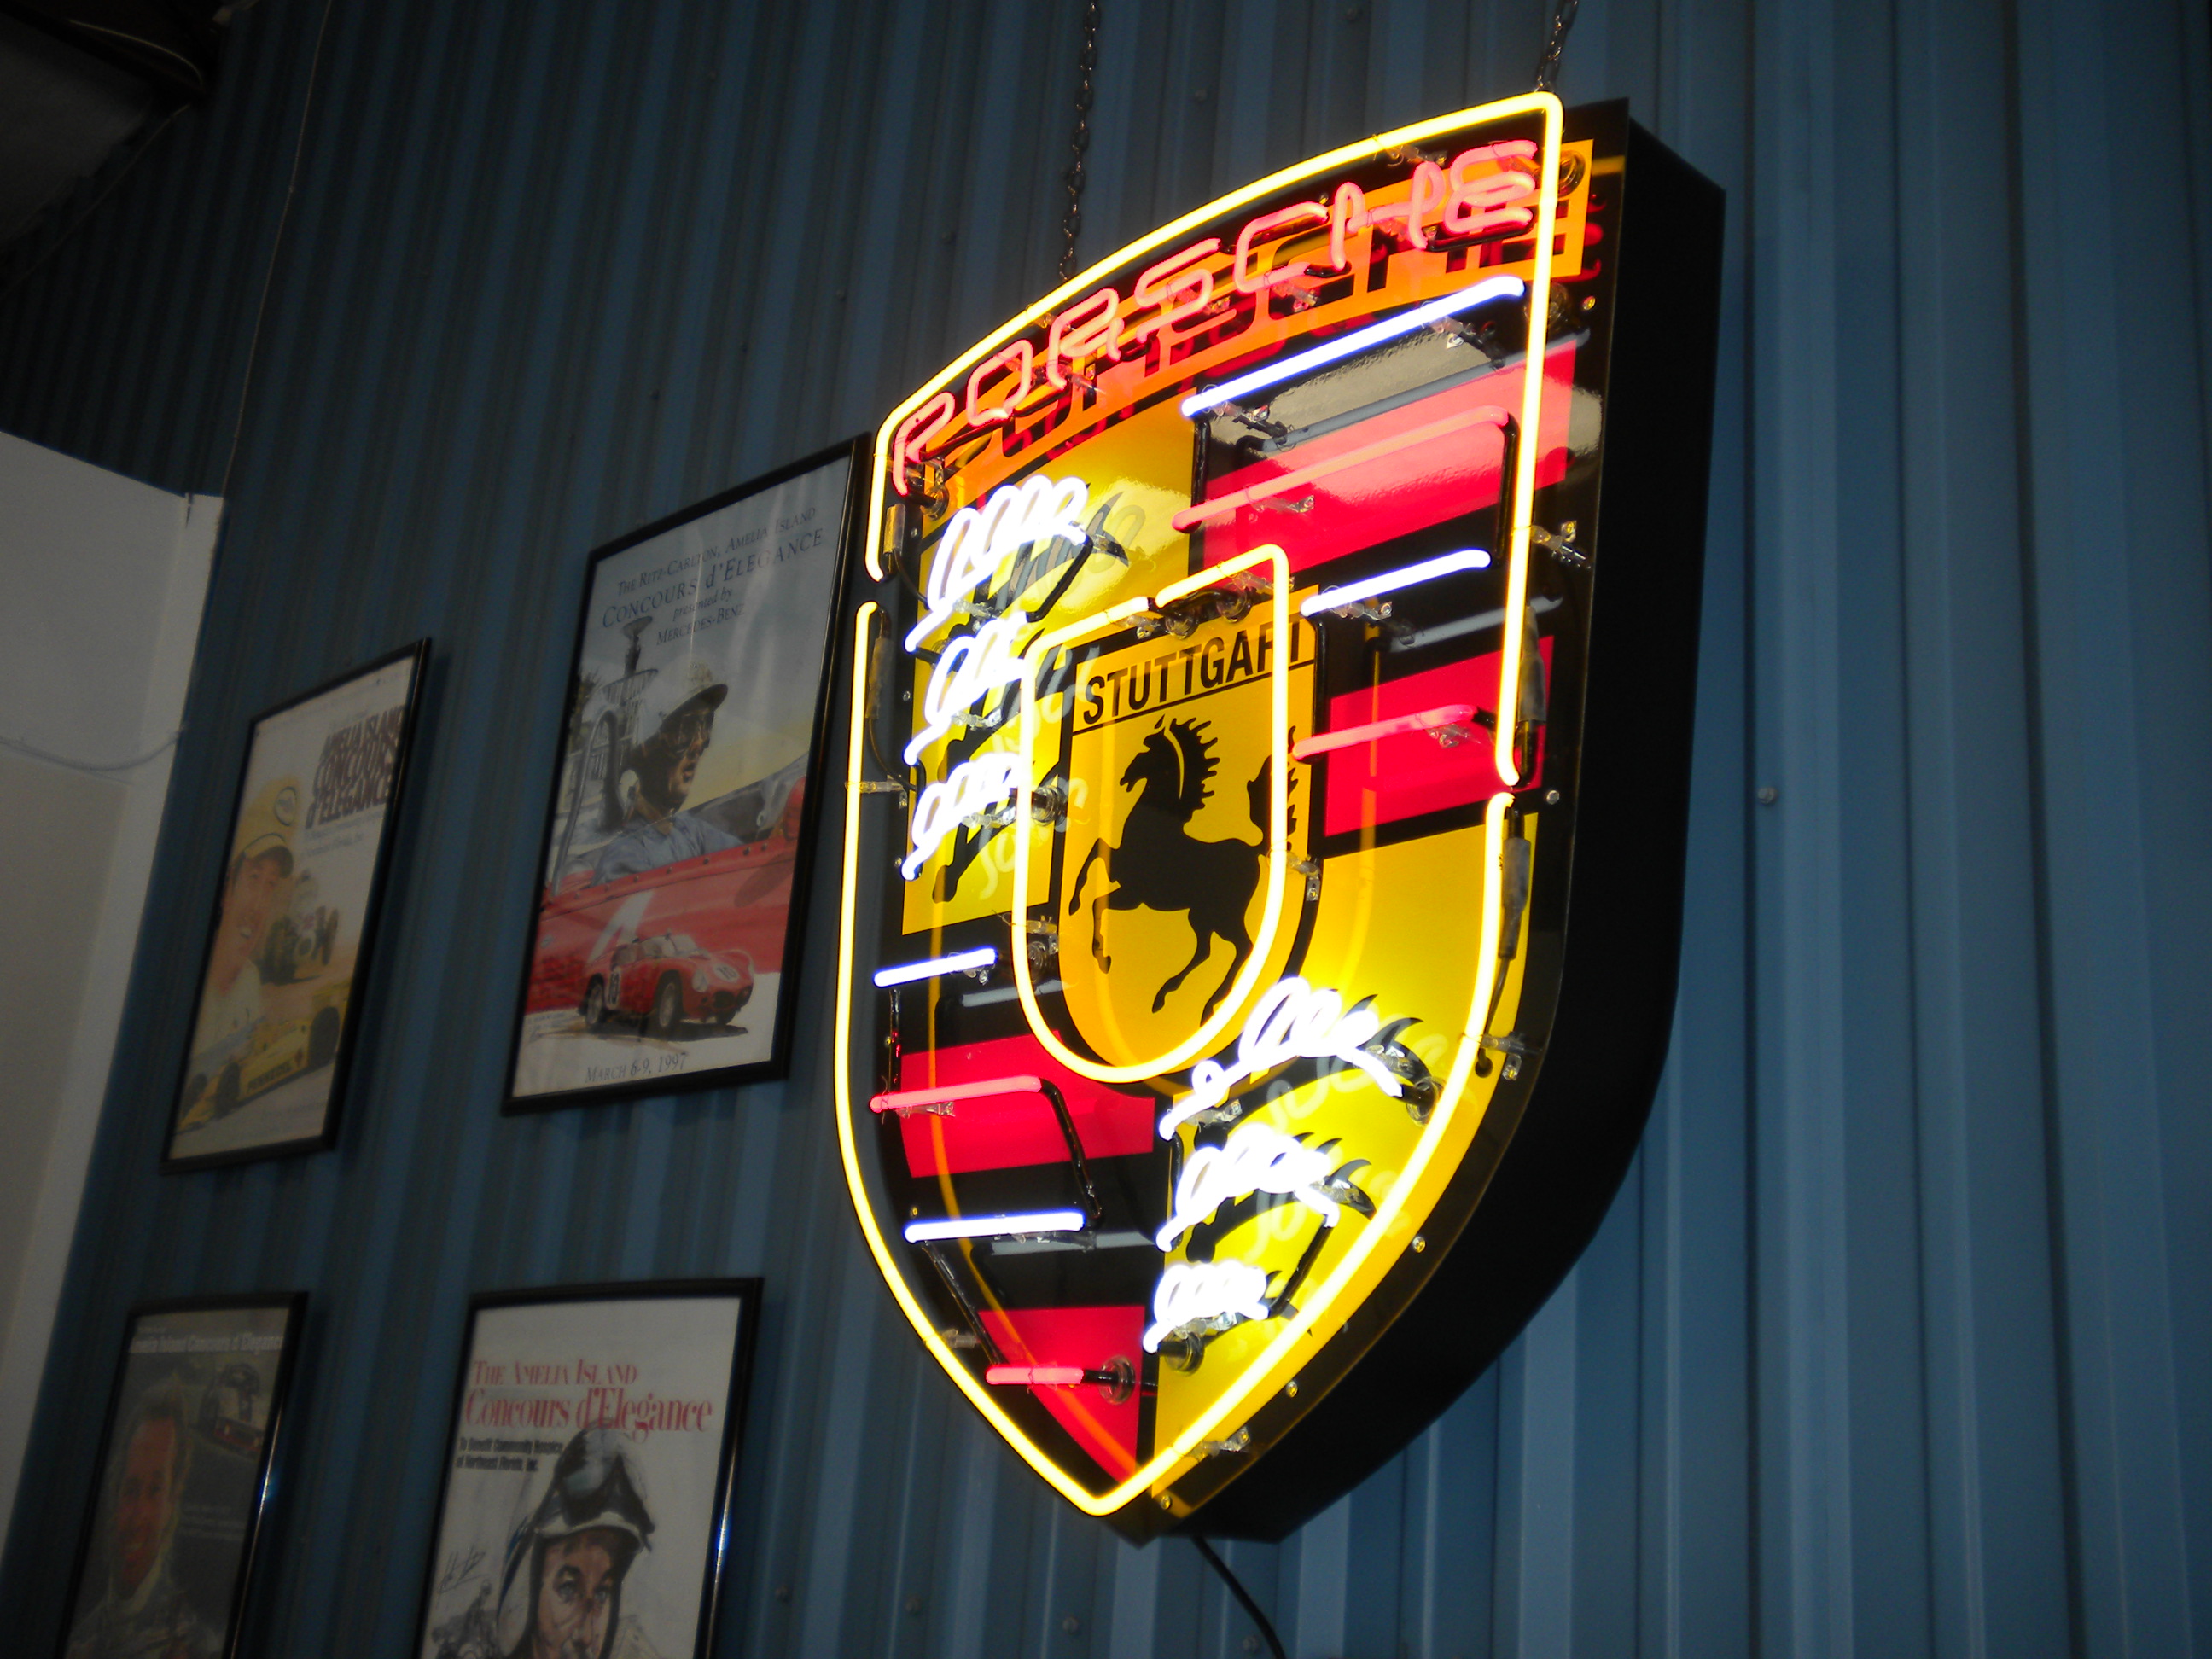 Porsche Dealer Neon Sign… A Must Have for your Garage! - Legacy Motorcars